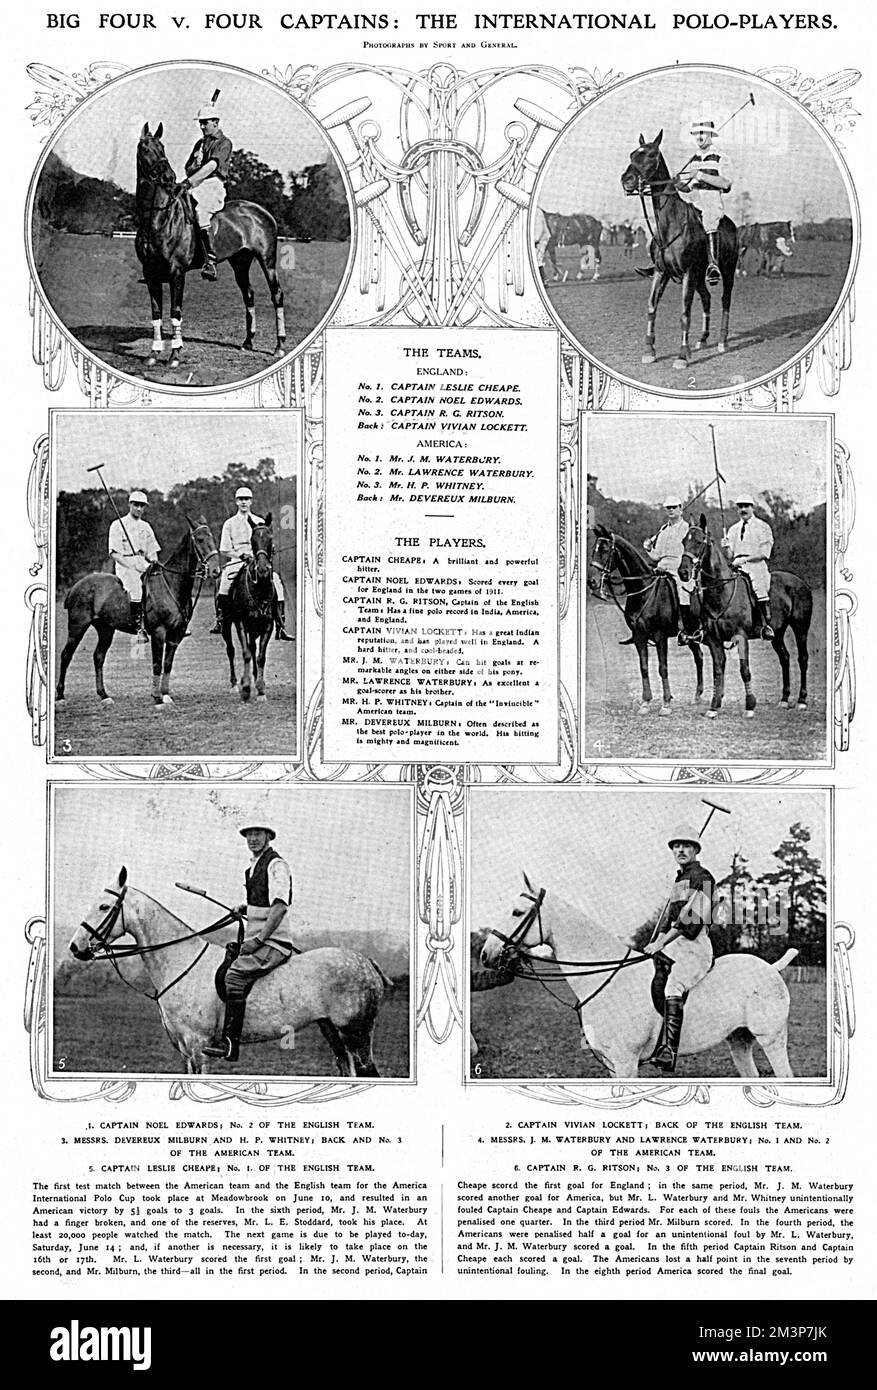 The British and American polo teams who played in the International Polo Trophy (Westchester Cup) in 1913.  The American team were known as the 'Big Four' and were J. M. Waterburyl, Lawrence Waterbury, H. P. Whitney and Mr Devereux Milburn.  The England team were Captain Leslie St Clair Cheape, Captain Noel Edwards, Captain R. G. Ritson and Captain Vivian Lockett.  The Americans won a narrow victory and the following year, England managed a famous victory against the USA a few months before the outbreak of the First World War.  Captain Cheape, described here as &quot;a brilliant and powerful h Stock Photo